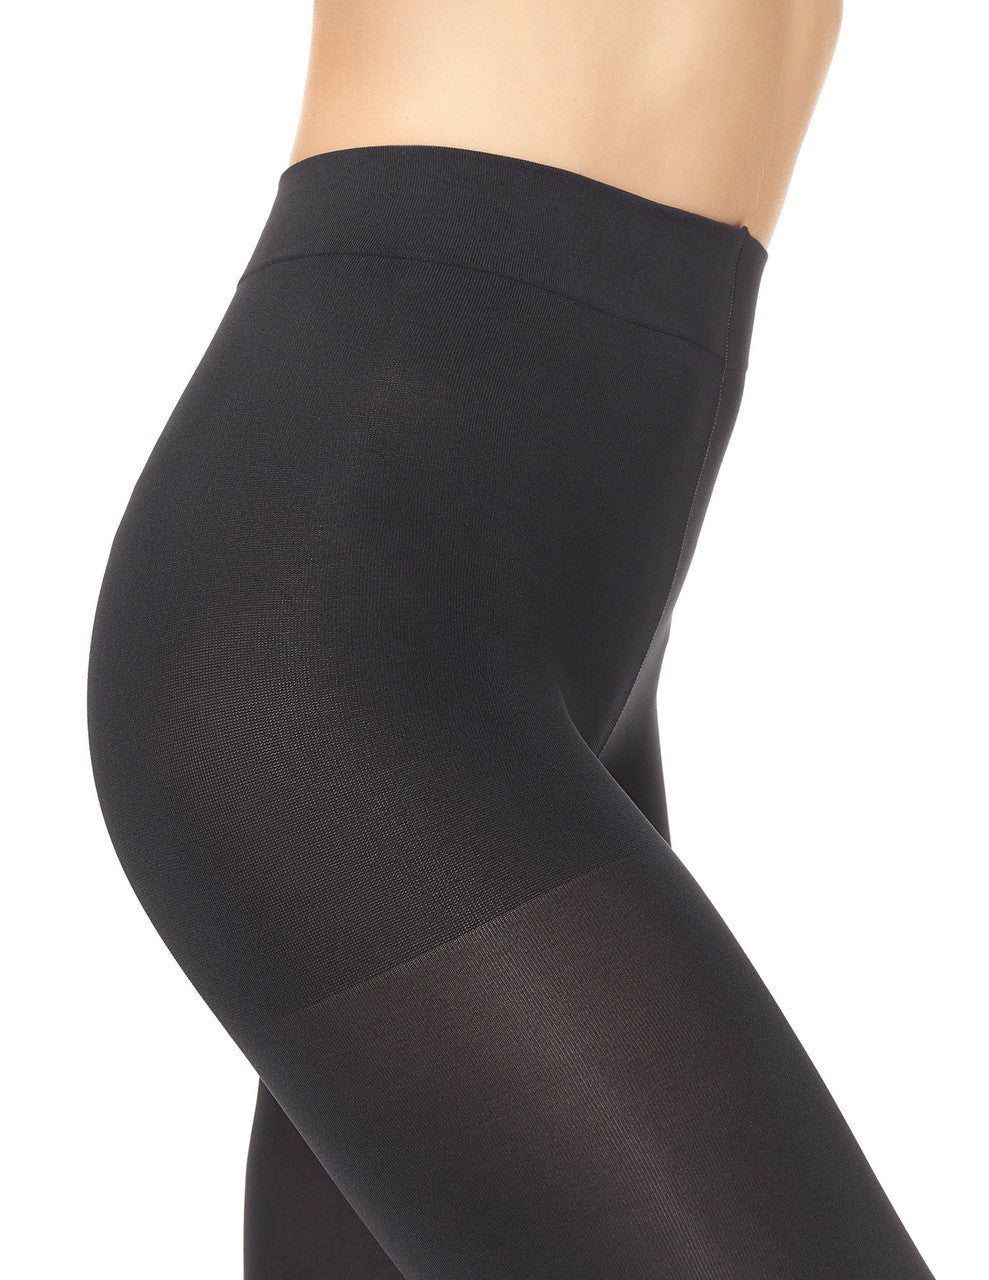 Blackout Tights With Control Top